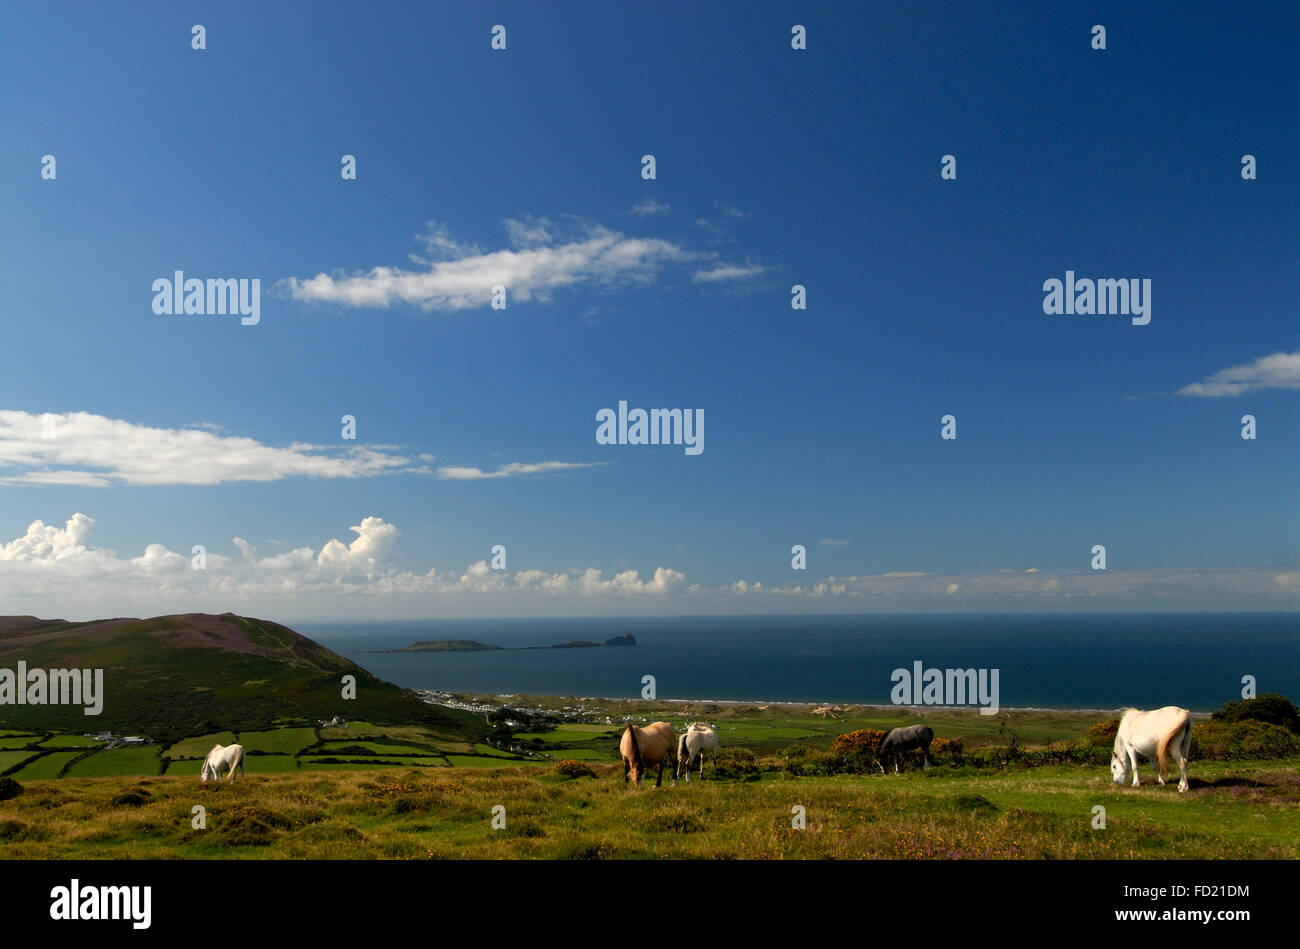 Llanmadoc Hill summit with ponies in foreground and Worms Head in distance. Blue sky with light cloud and calm sea. Stock Photo